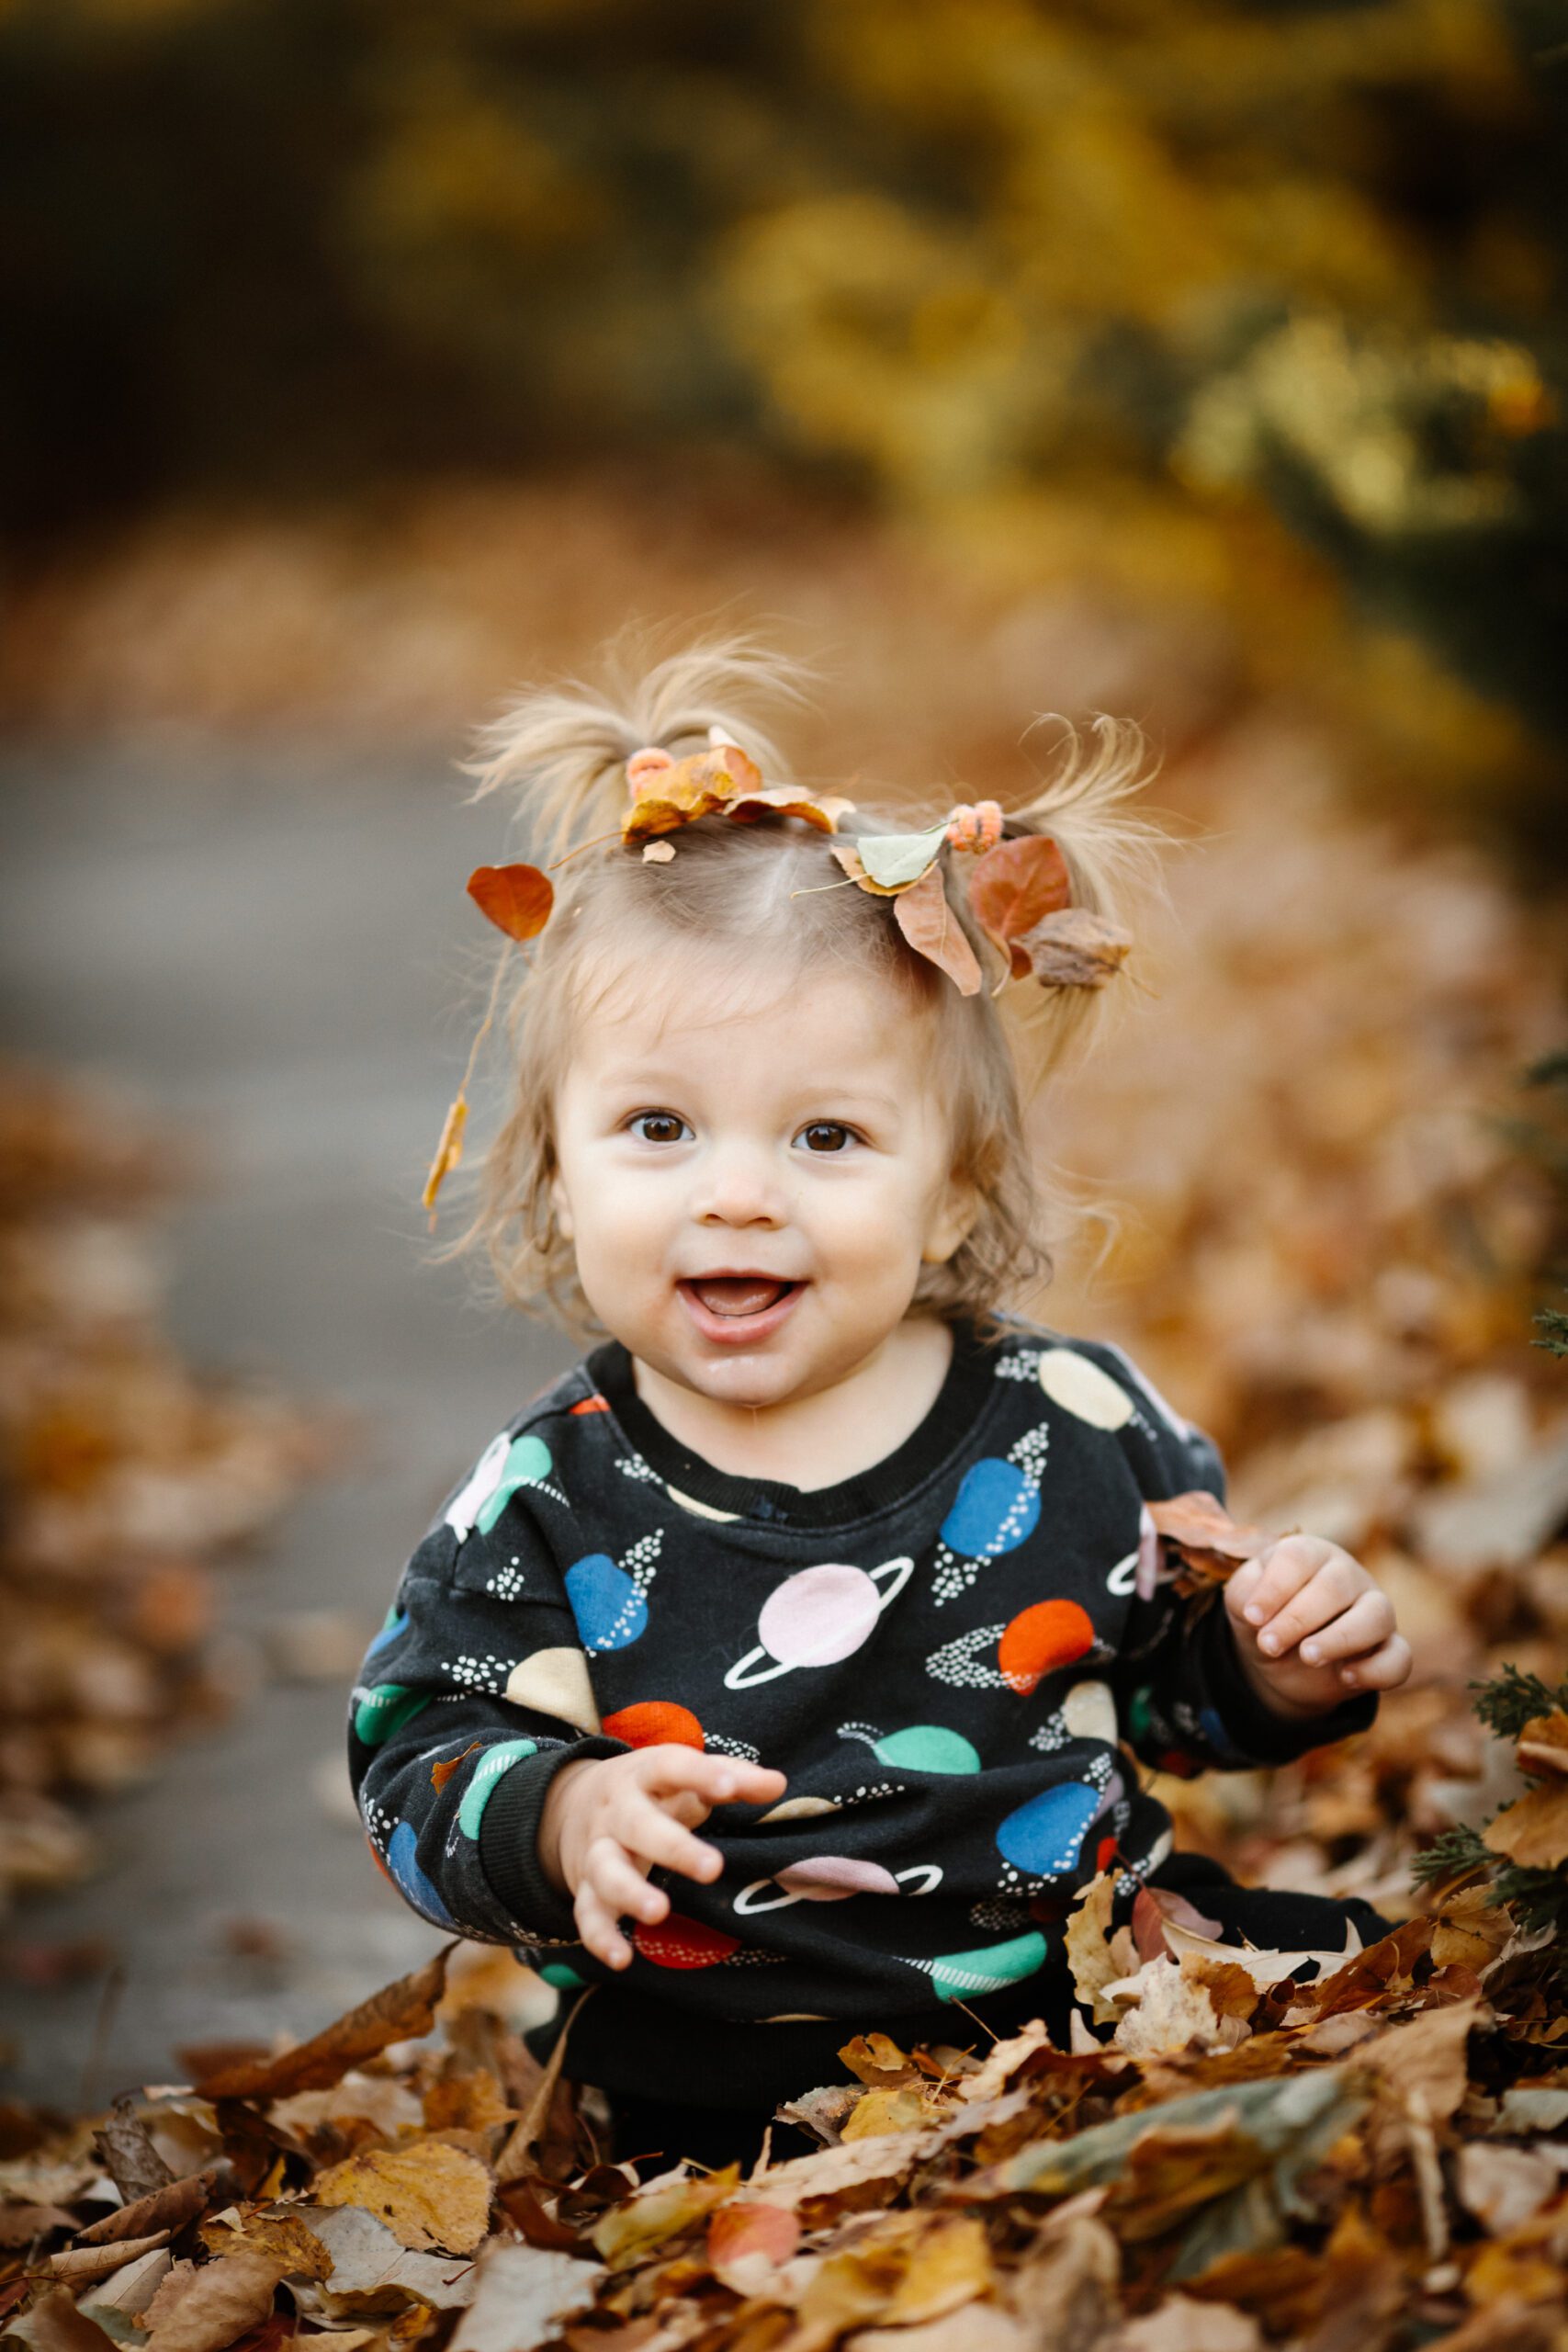 Baby playing in fall leaves portrait